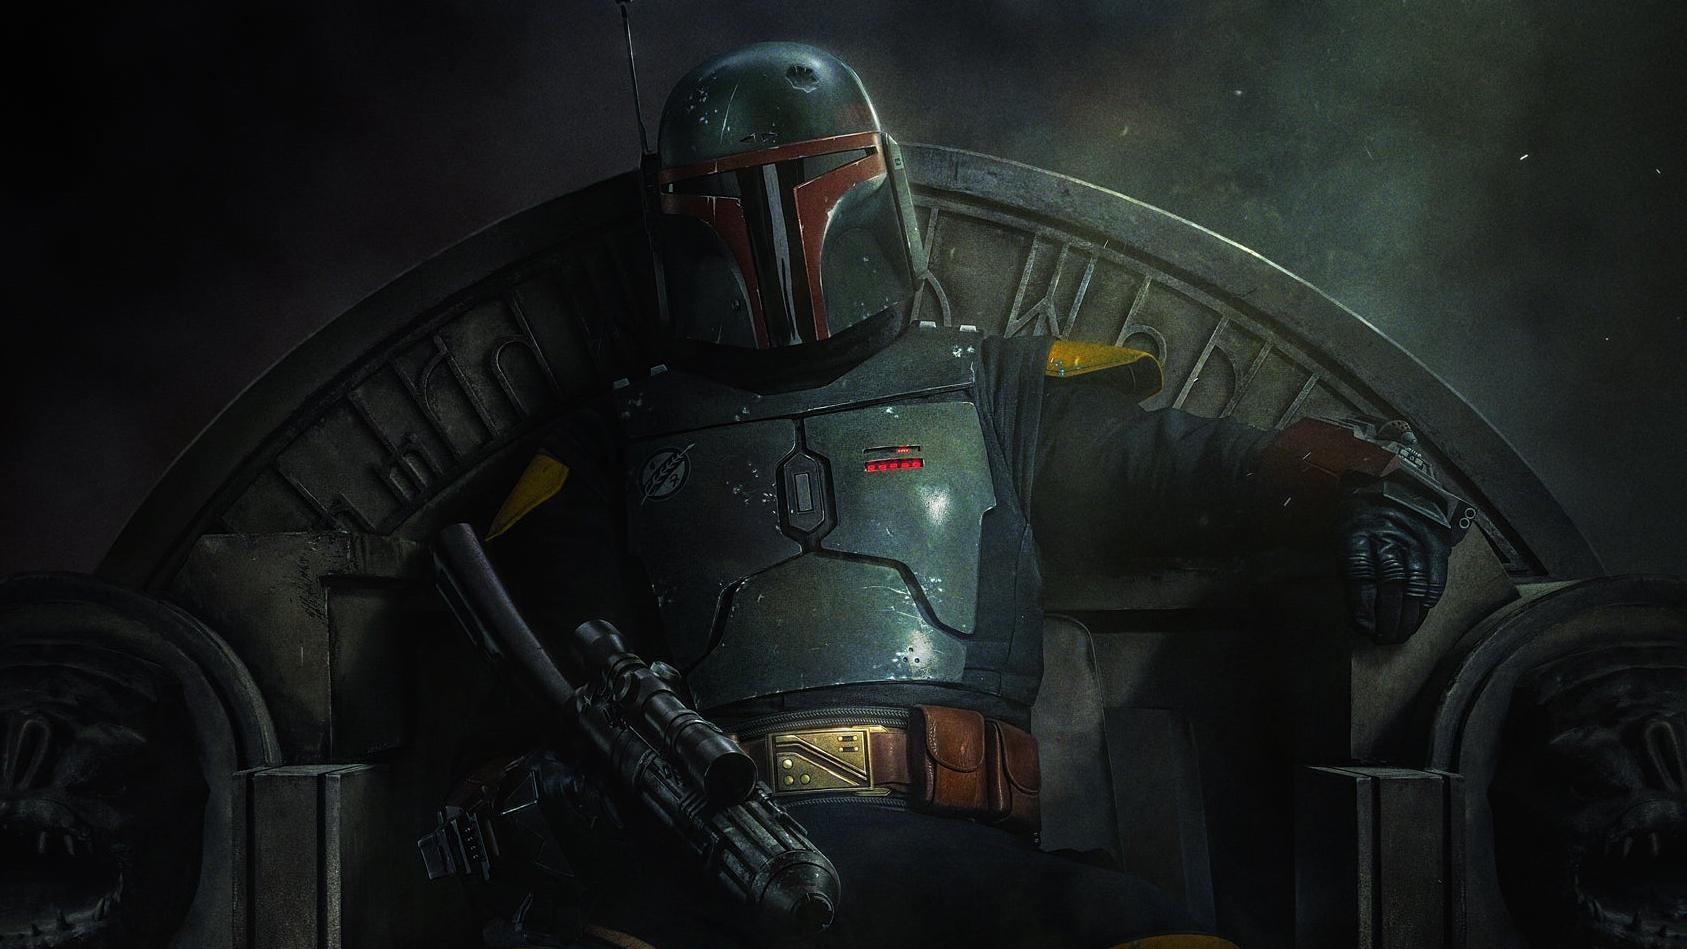 Disney Plus’ The Book Of Boba Fett will arrive this December